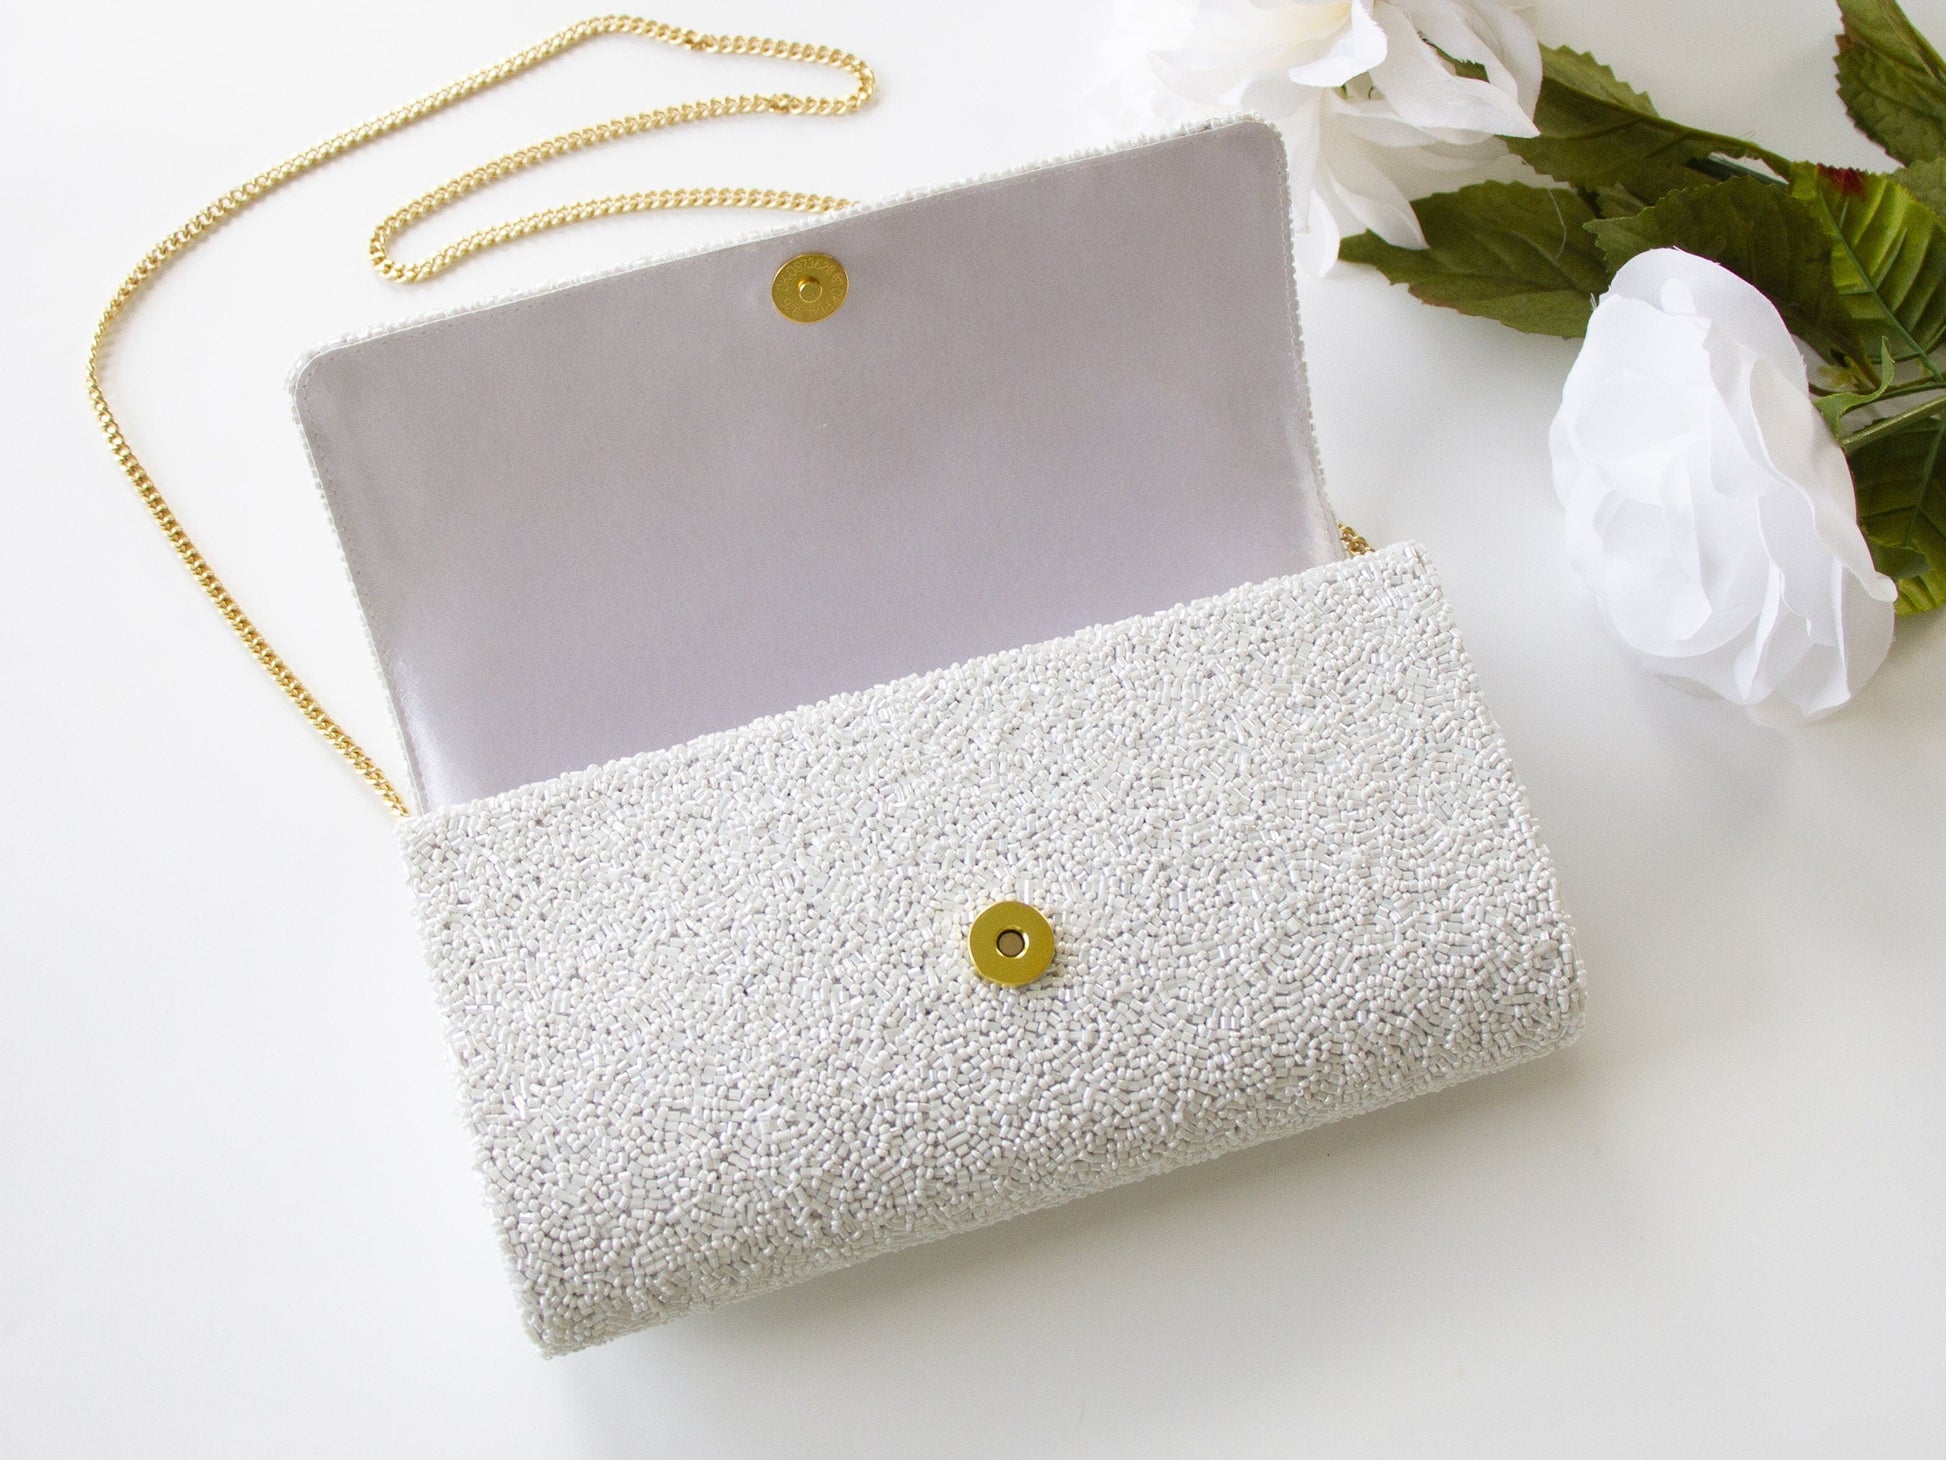 Elegant Bridal Clutch: Custom Gold Pearl Beaded Clutch Purse measuring 9.5in x 5in x 3in. Handcrafted to perfection, this bridal accessory adds a touch of sophistication to any ensemble. Each clutch is uniquely designed, ensuring brides have a one-of-a-kind accessory for their special day